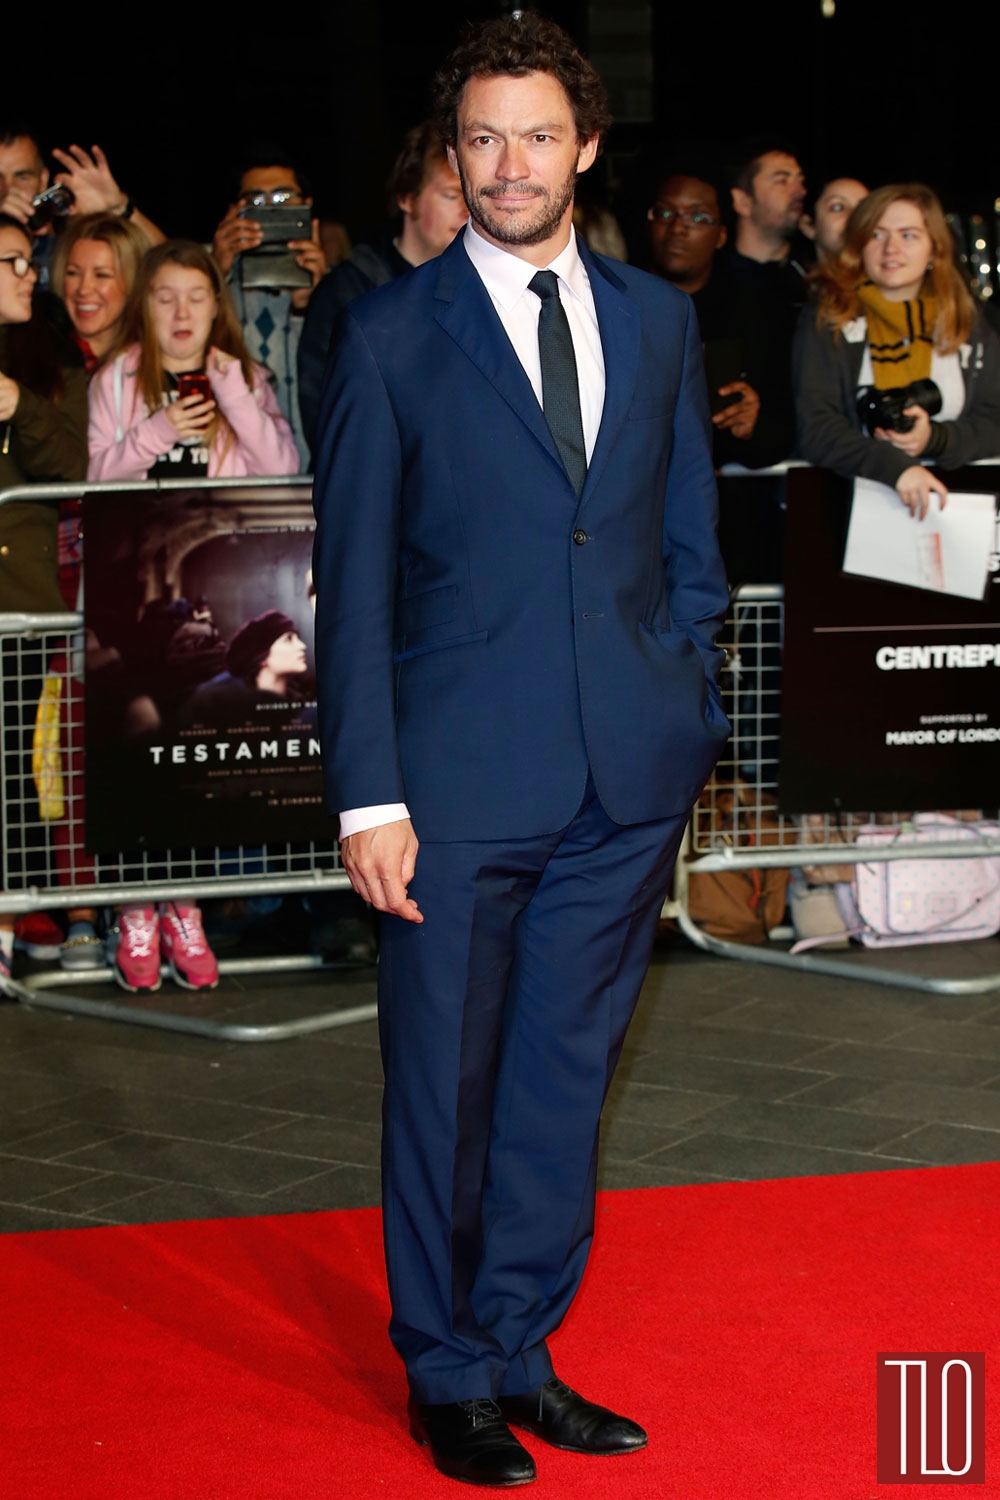 Dominic-West-Testament-of-Youth-Movie-Premiere-Tom-Lorenzo-Site-TLO (1)